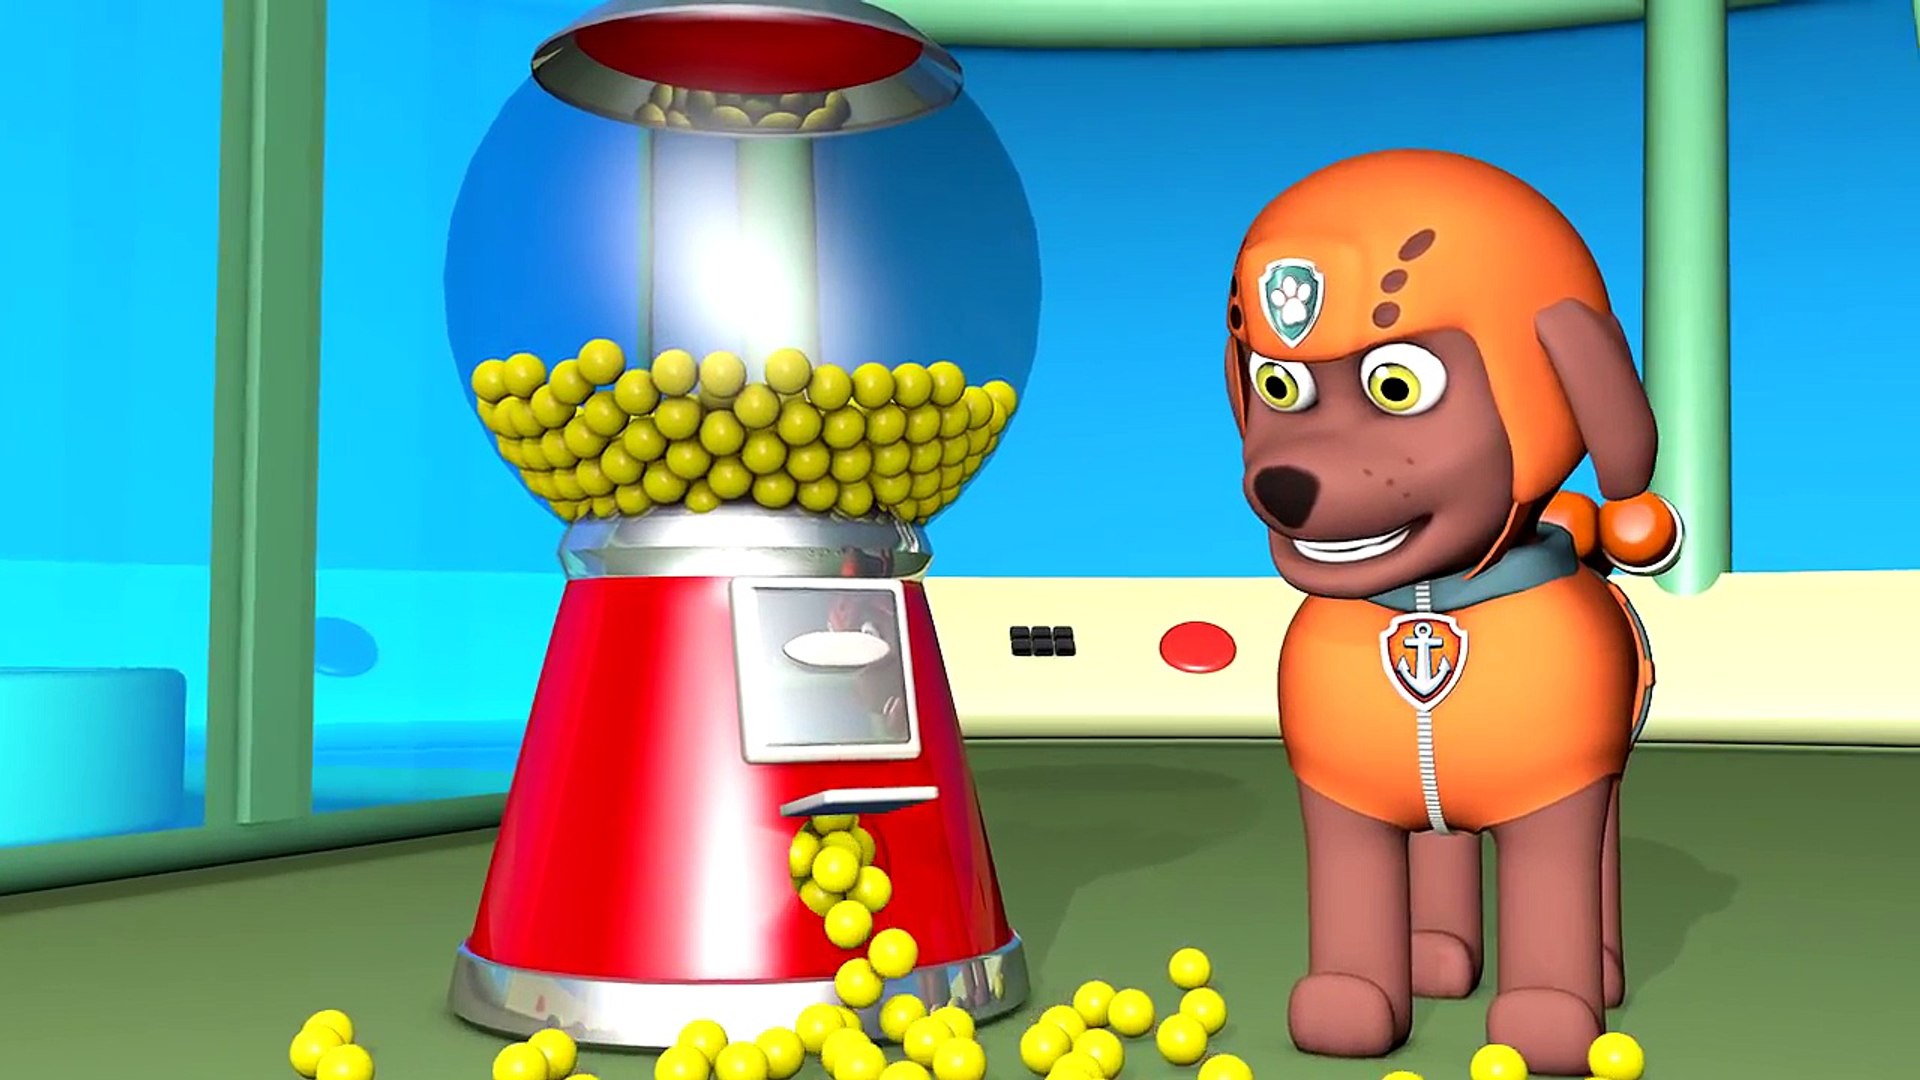 PAW PATROL learning colors catoon with ZUMA and gumball machine | Children Learning Video